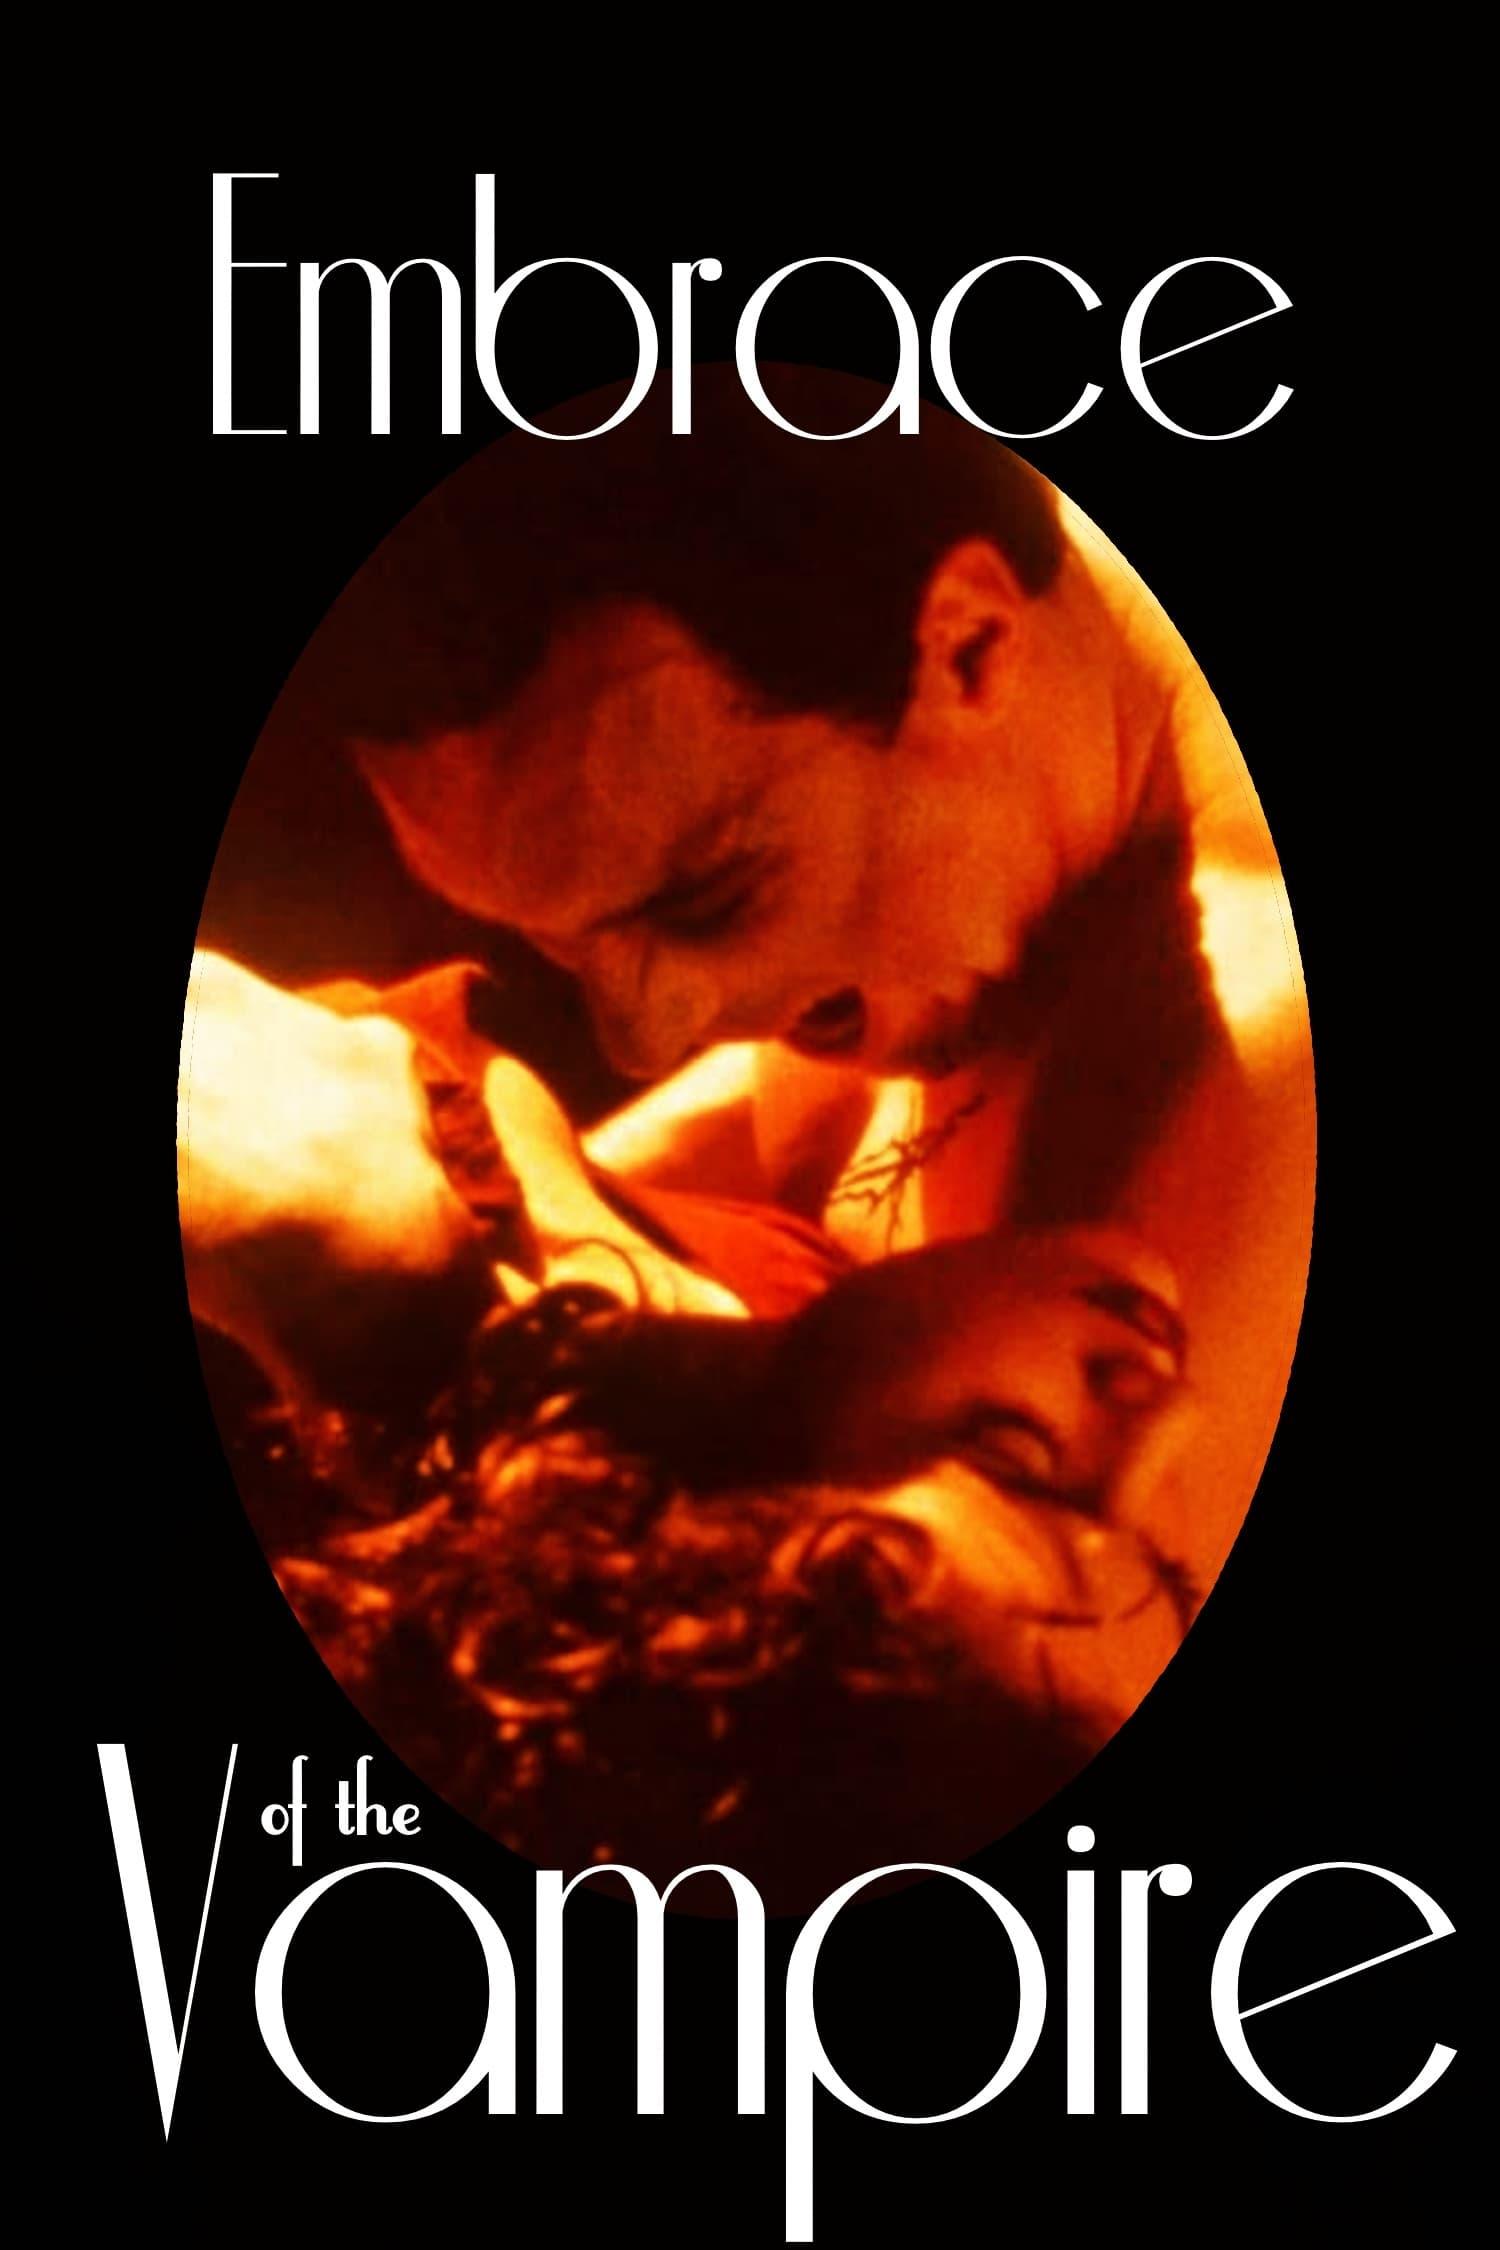 Embrace of the Vampire poster